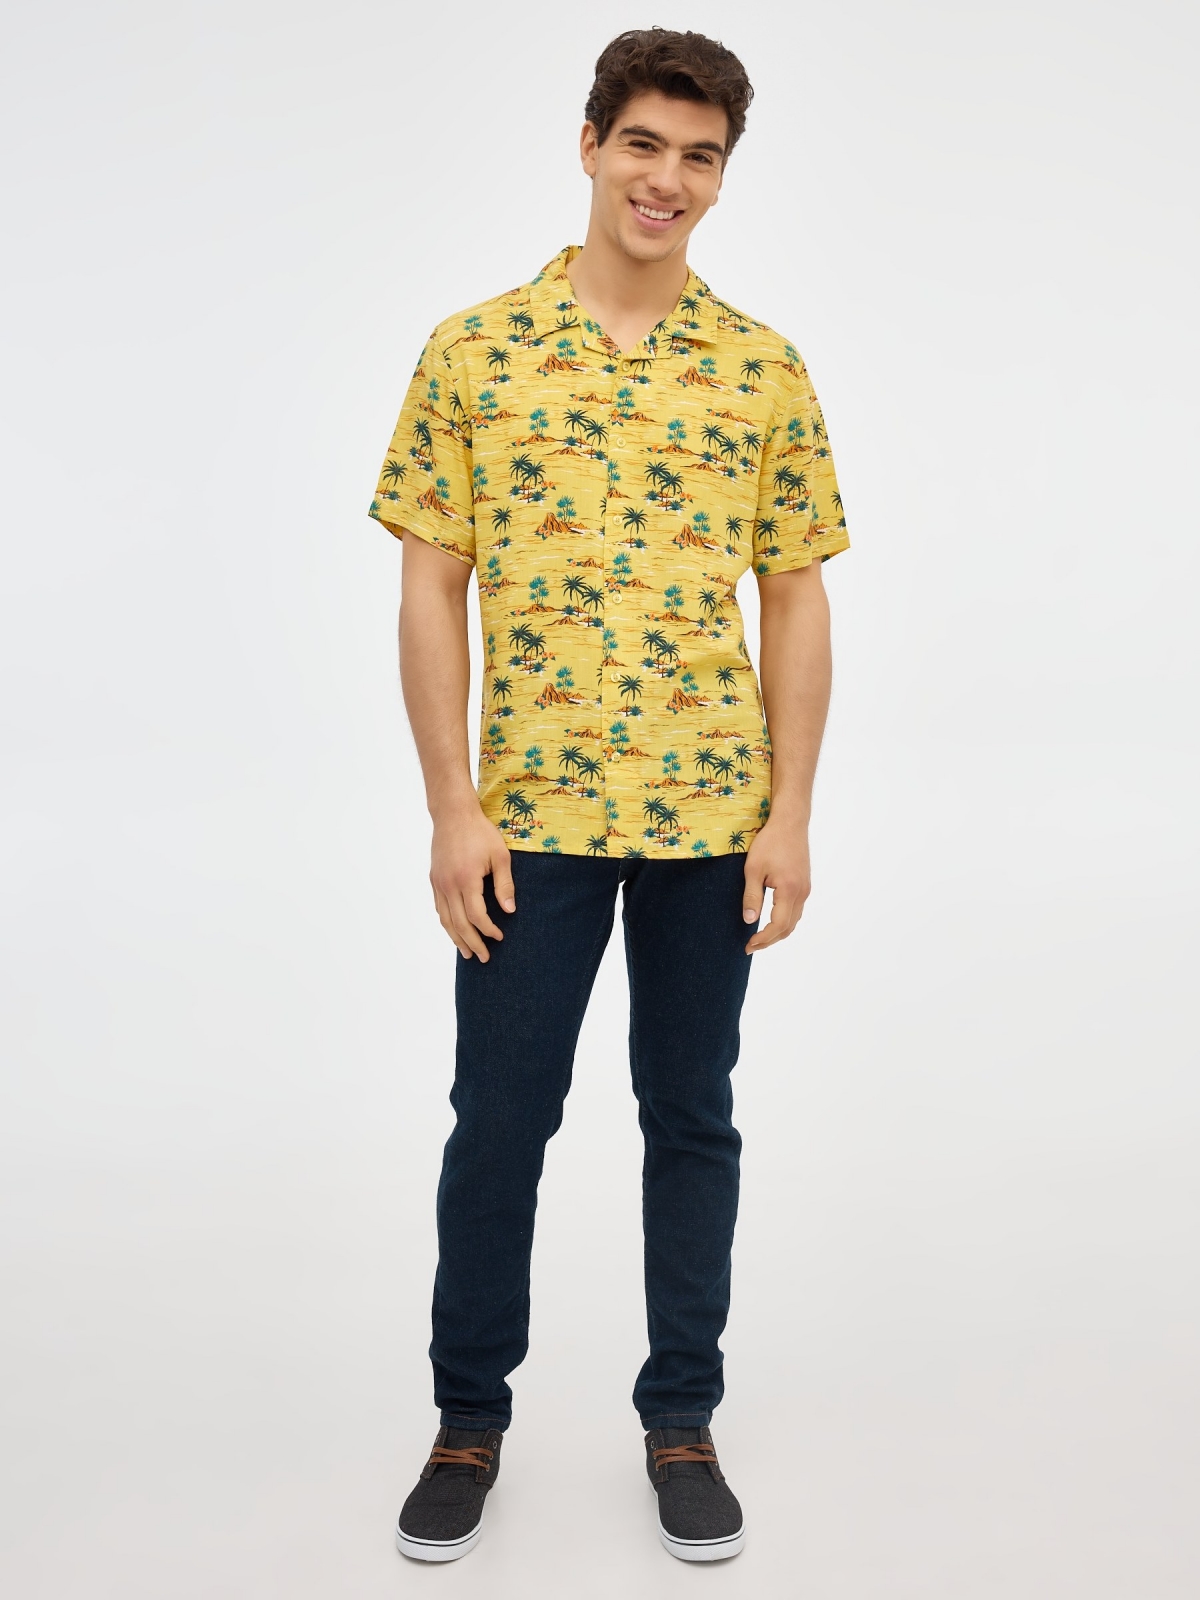 Total print palm tree shirt yellow front view